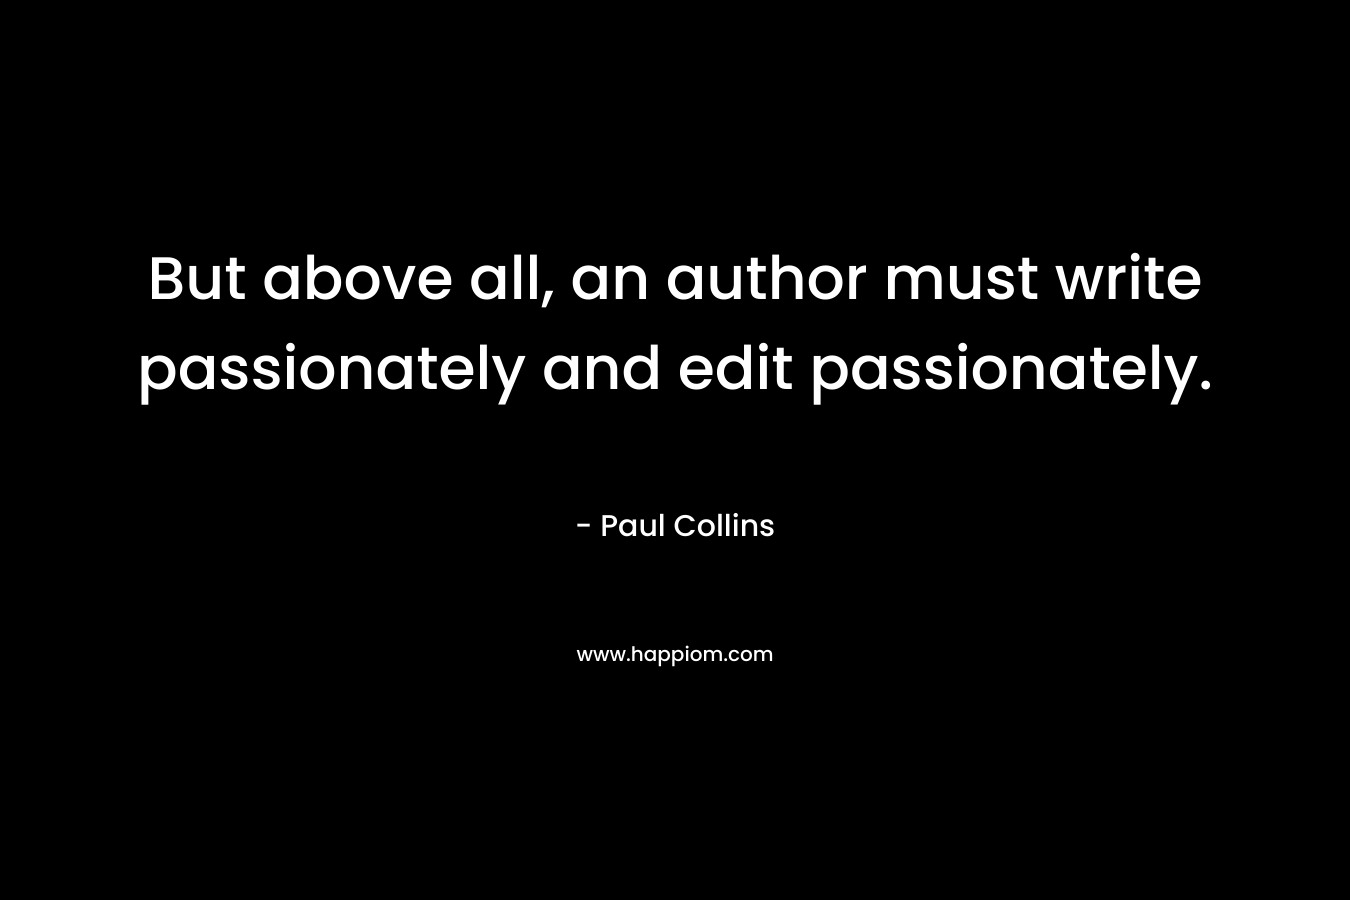 But above all, an author must write passionately and edit passionately.